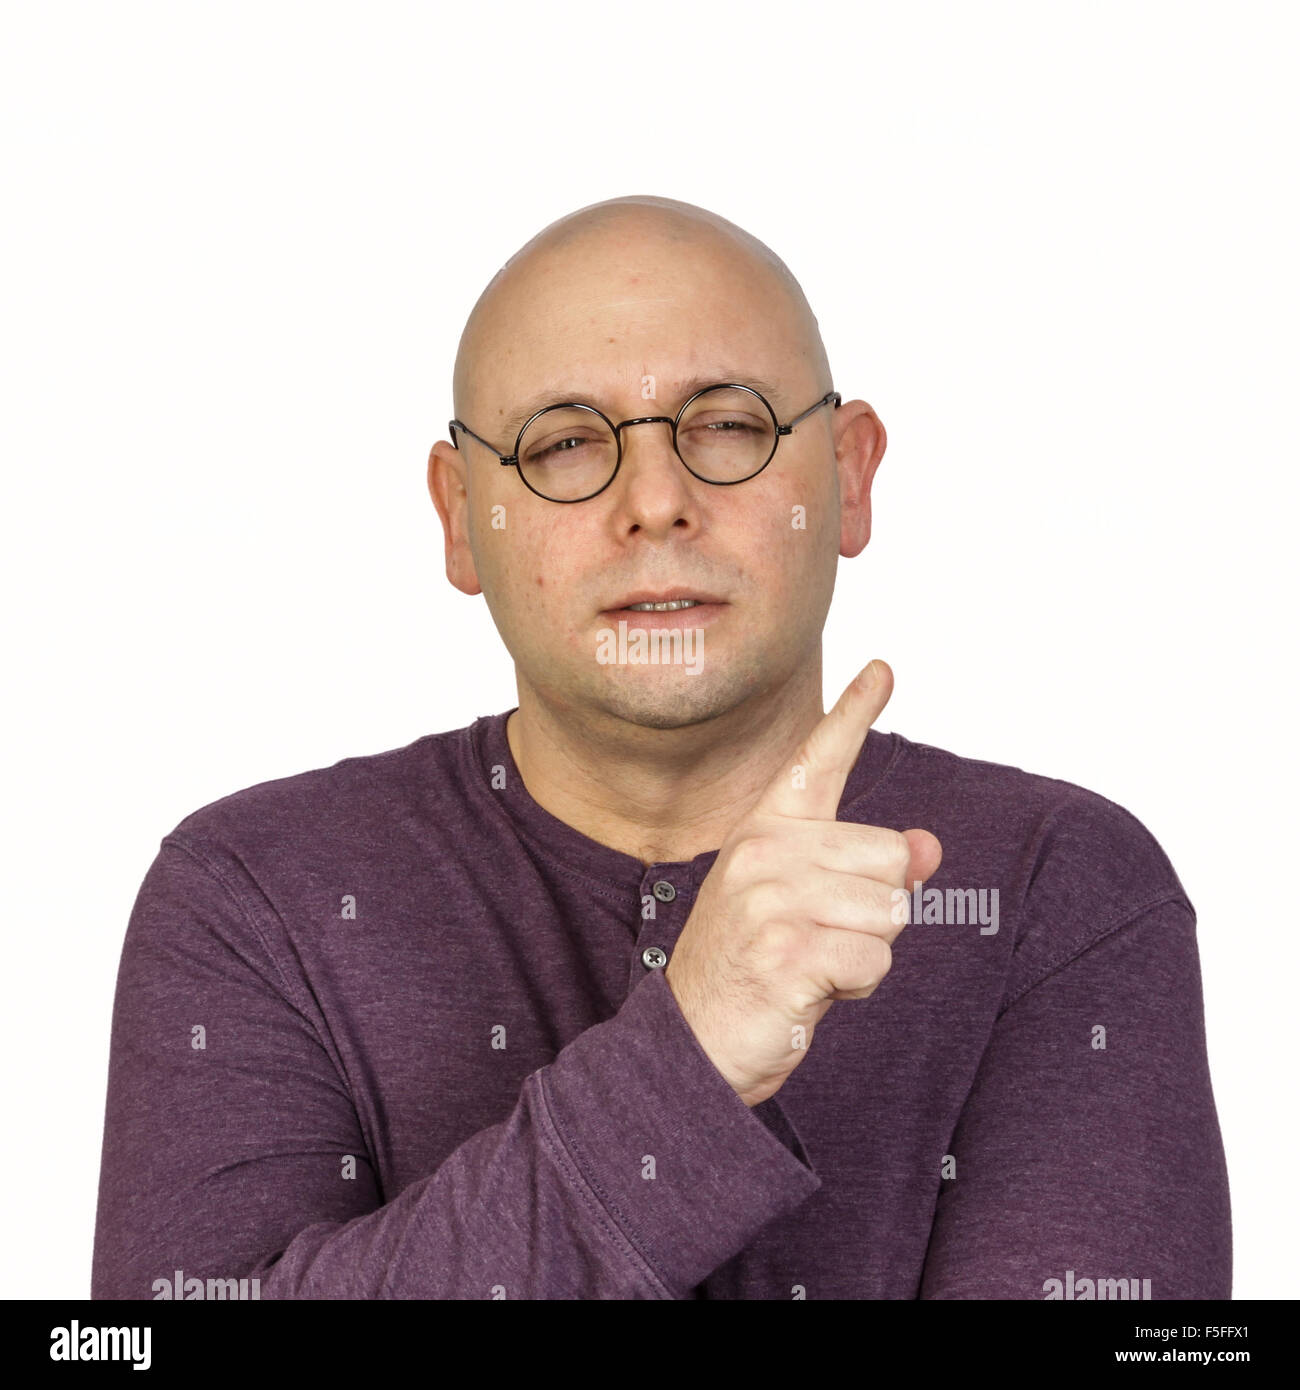 Studio portrait of bald man with round glasses gesturing in a professorial  way Stock Photo - Alamy